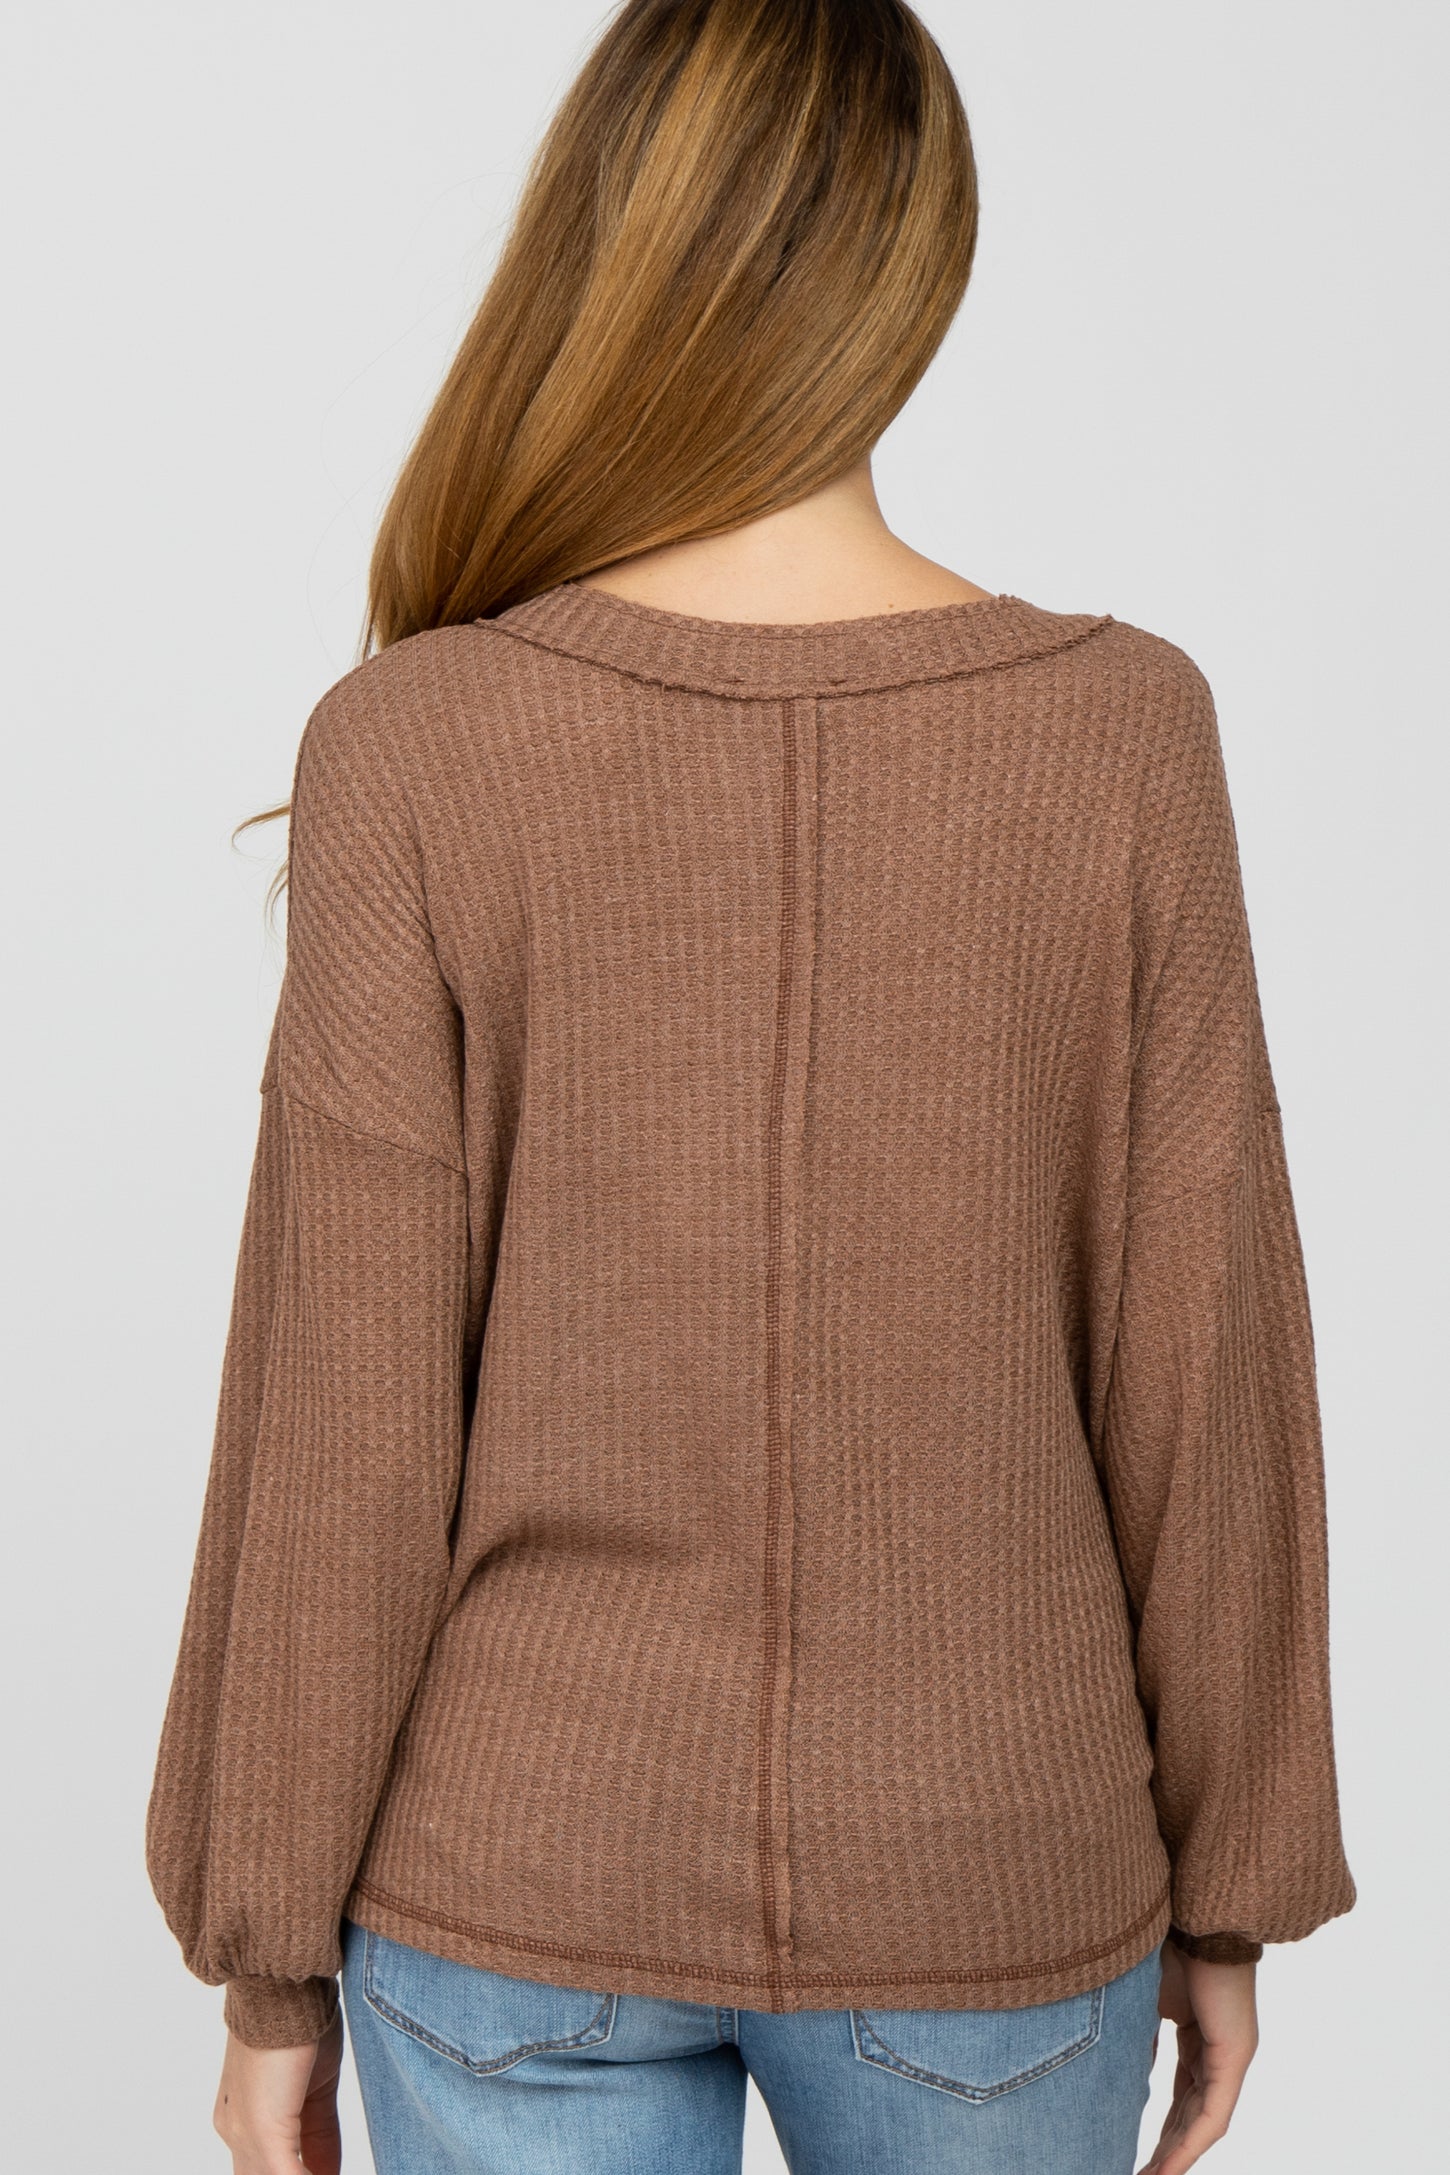 Brown Waffle Knit Button Accent Maternity Top